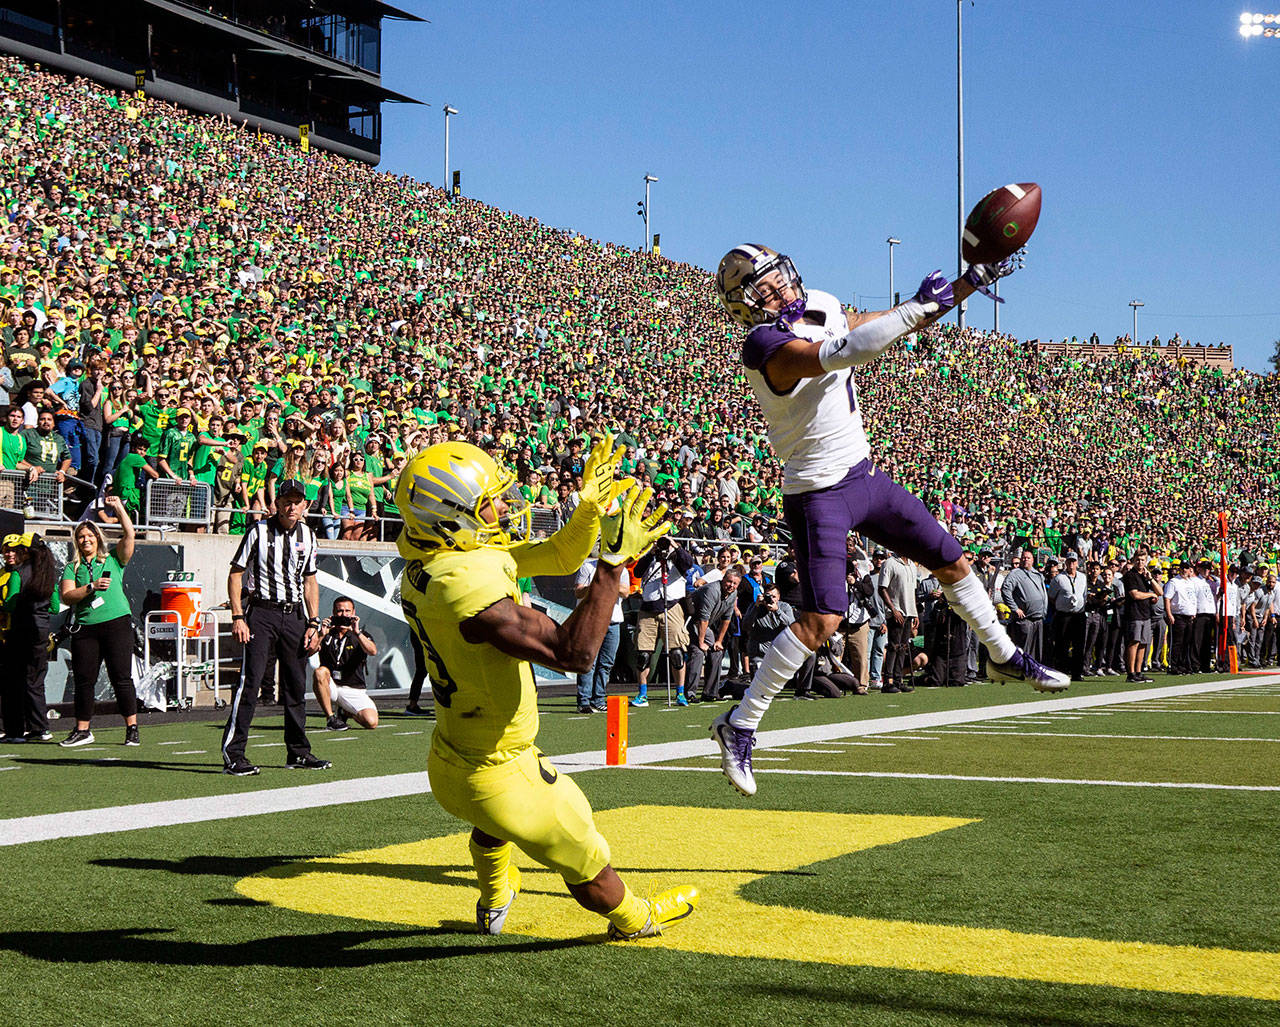 Washington defensive back Byron Murphy (1), breaks up a pass intended for Oregon wide receiver Dillon Mitchell (13) in the second quarter during a game in 2018 in Eugene, Ore. (AP Photo/Thomas Boyd)